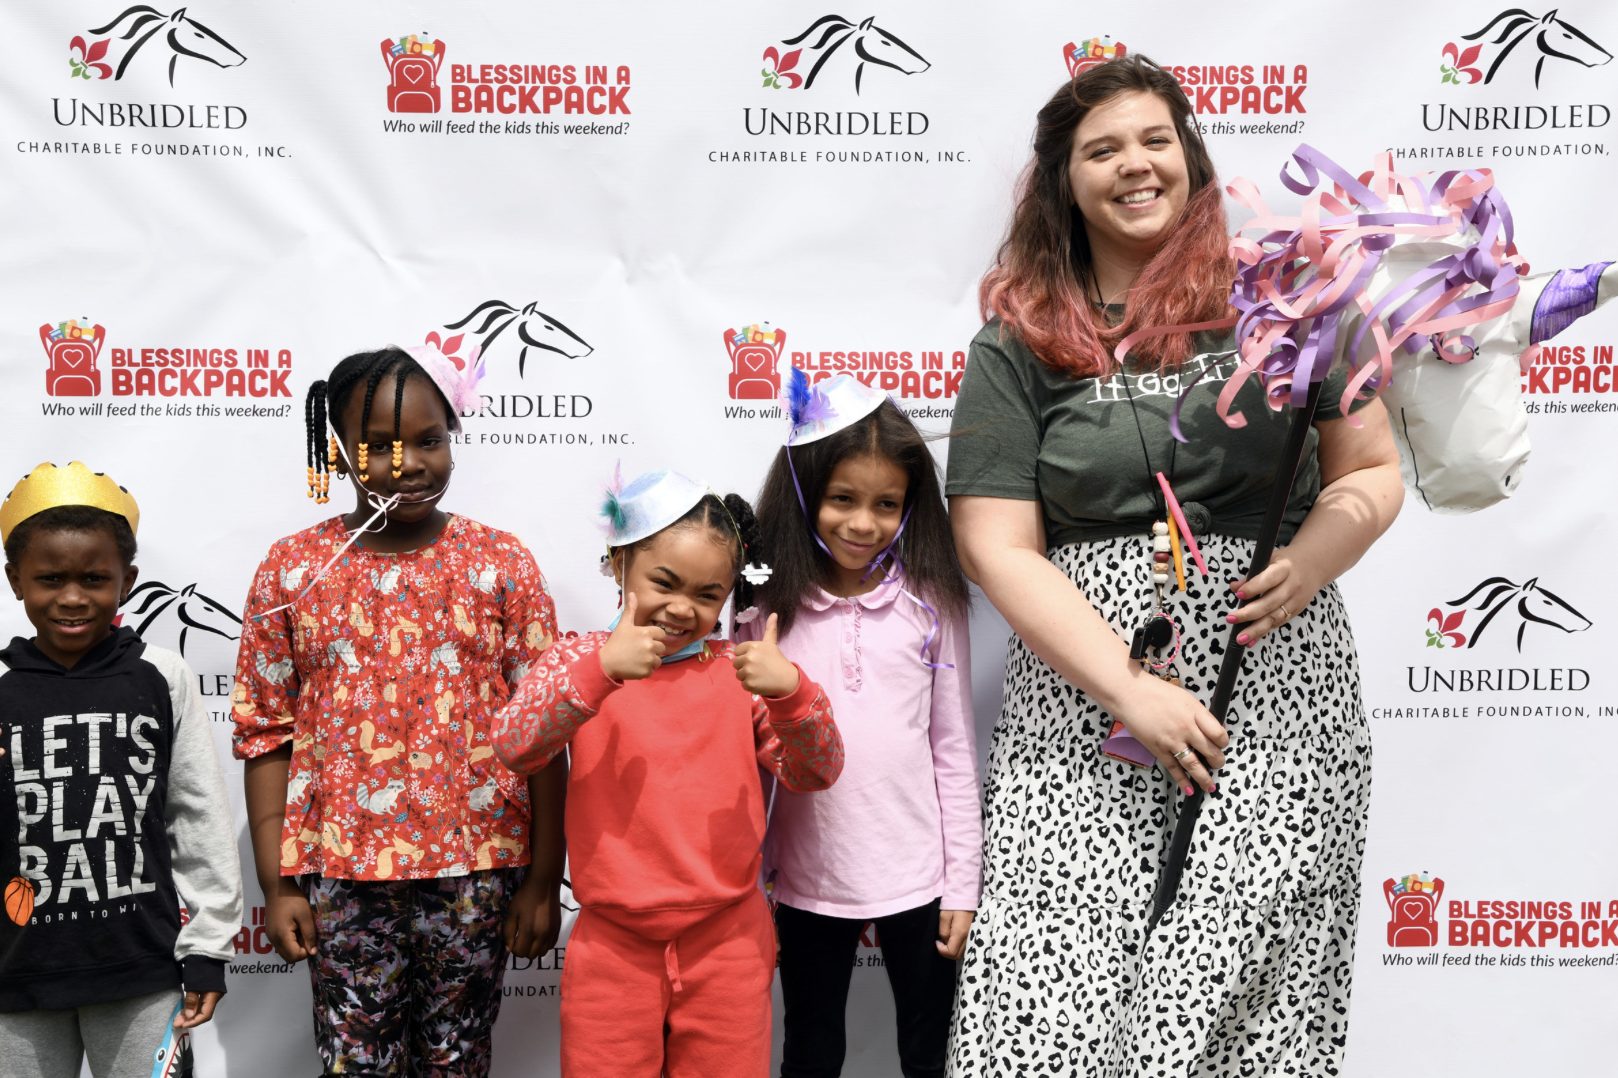 Blessings in a Backpack Partners With Unbridled Charitable Foundation To Host “Unbridled Afternoon” for Louisville Students